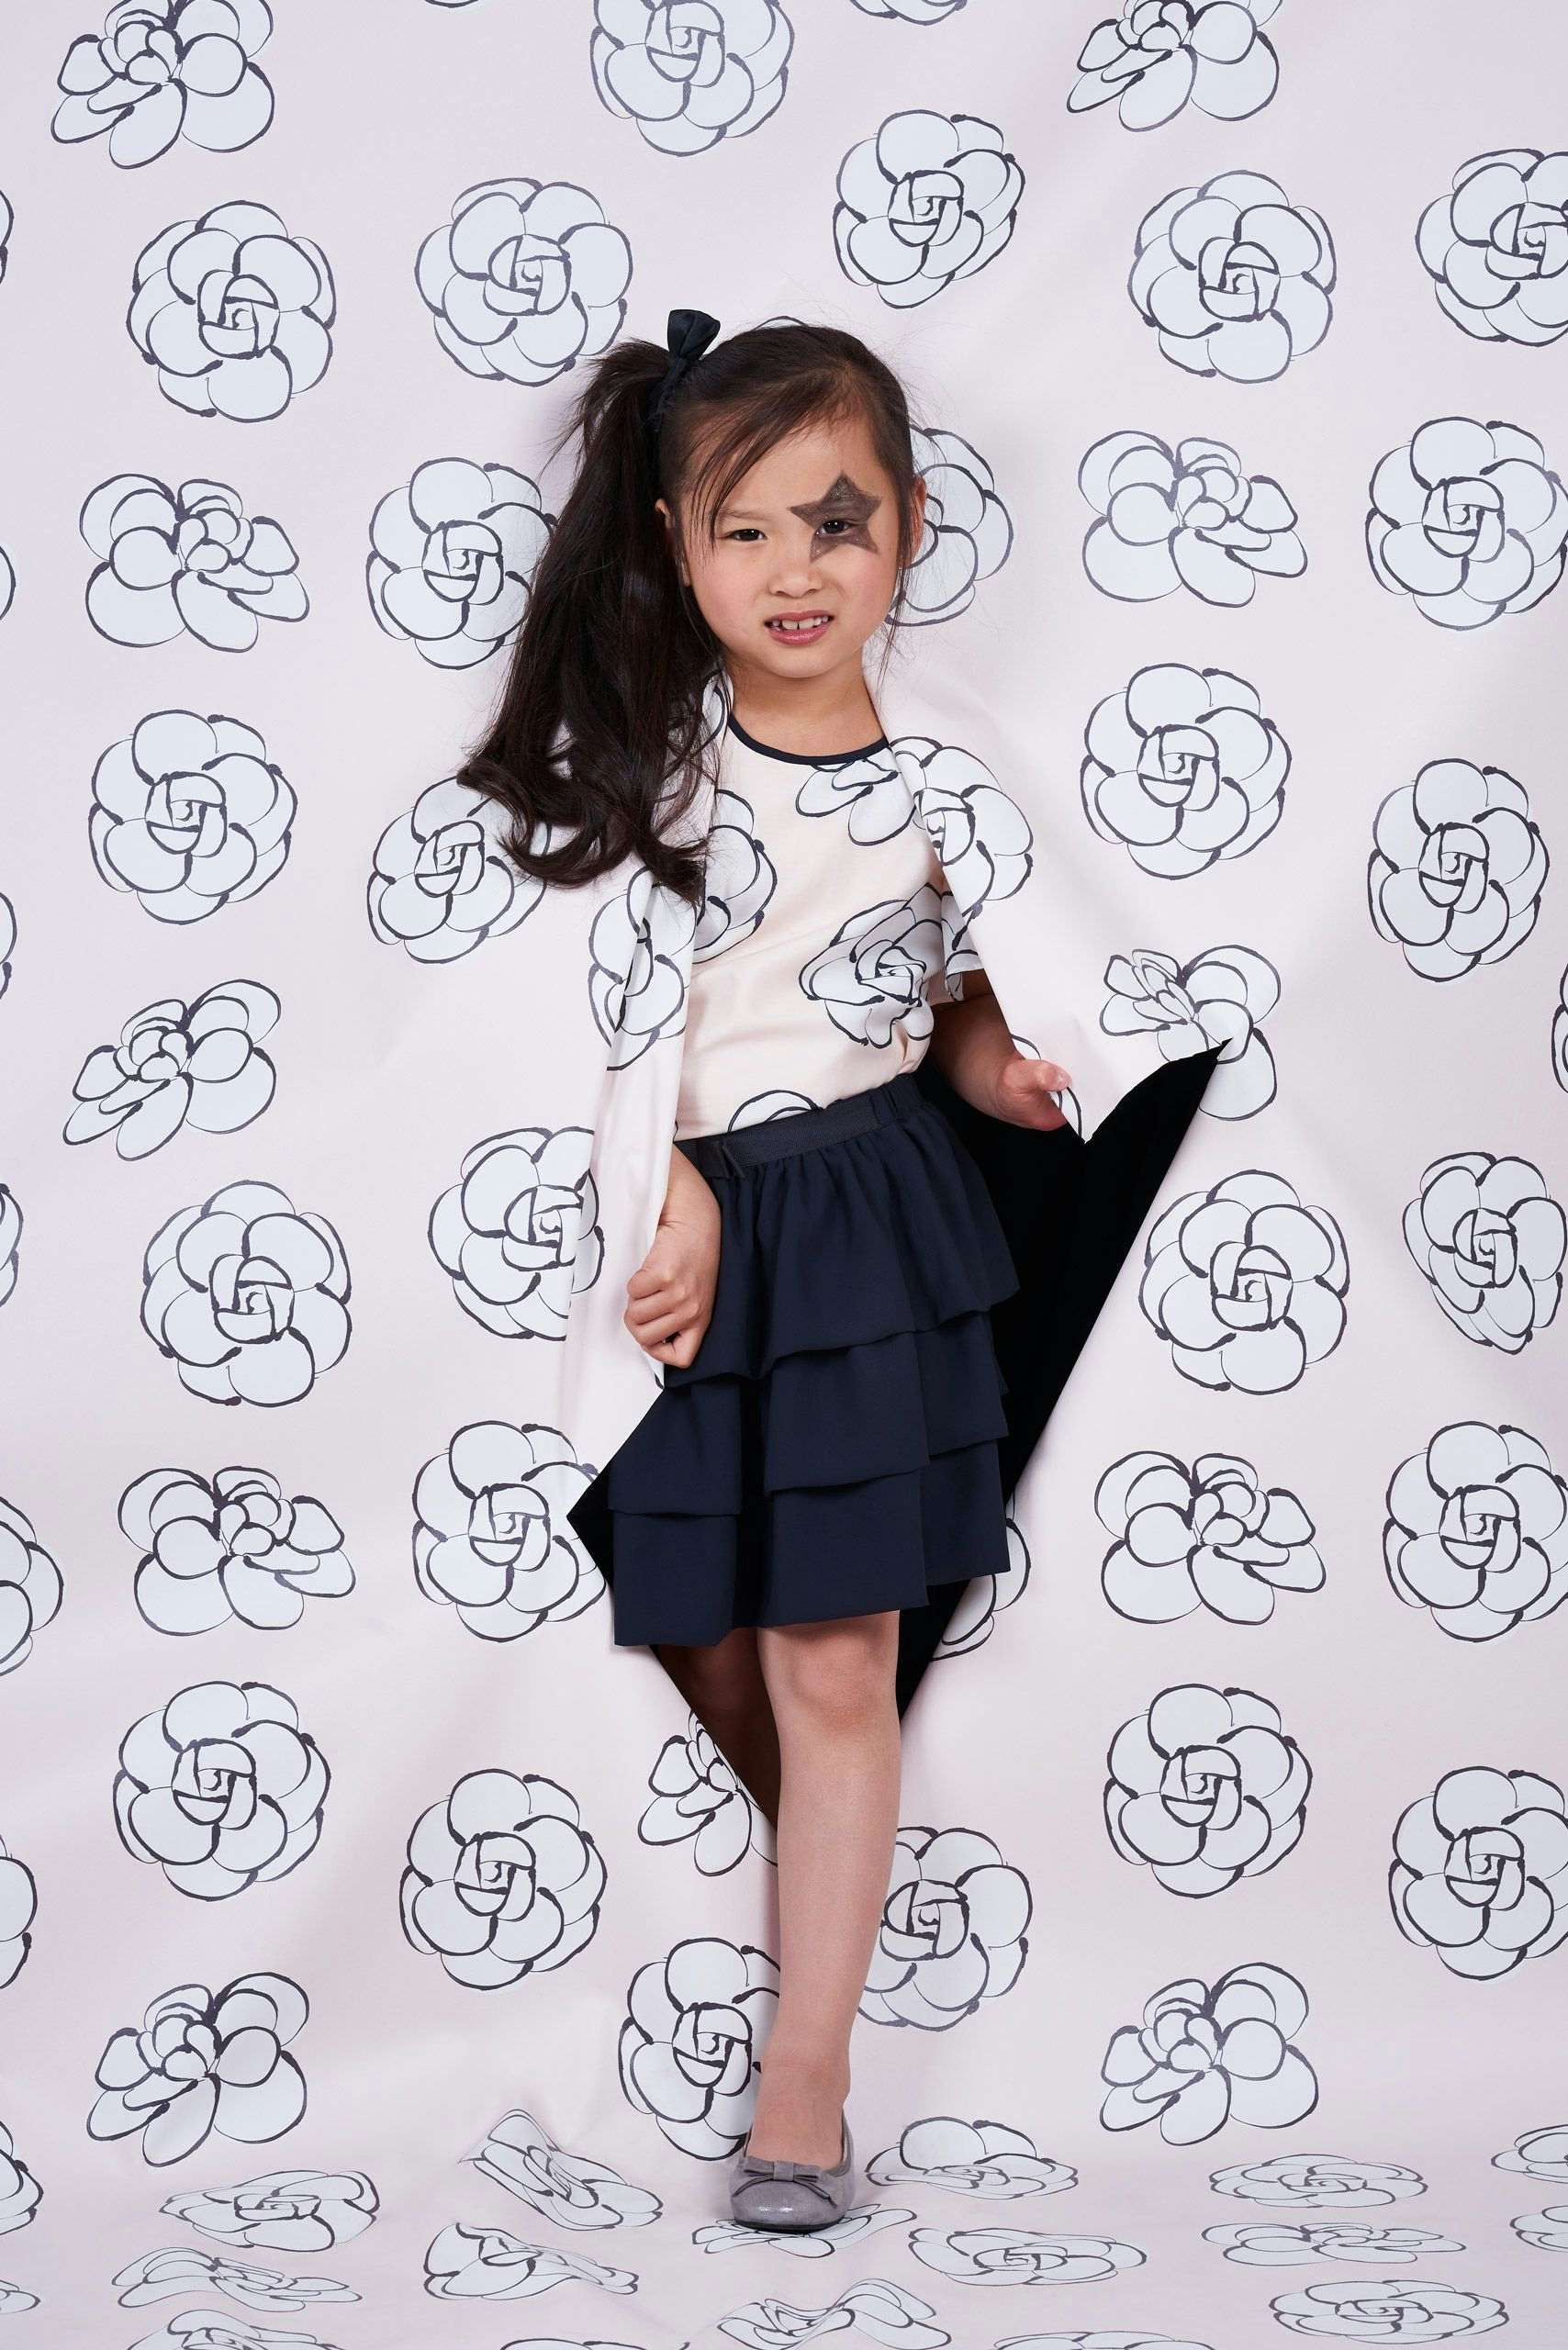 Model Zoe photographed in a Marese Couture dress by Xavier Wendling for BigBen Kids